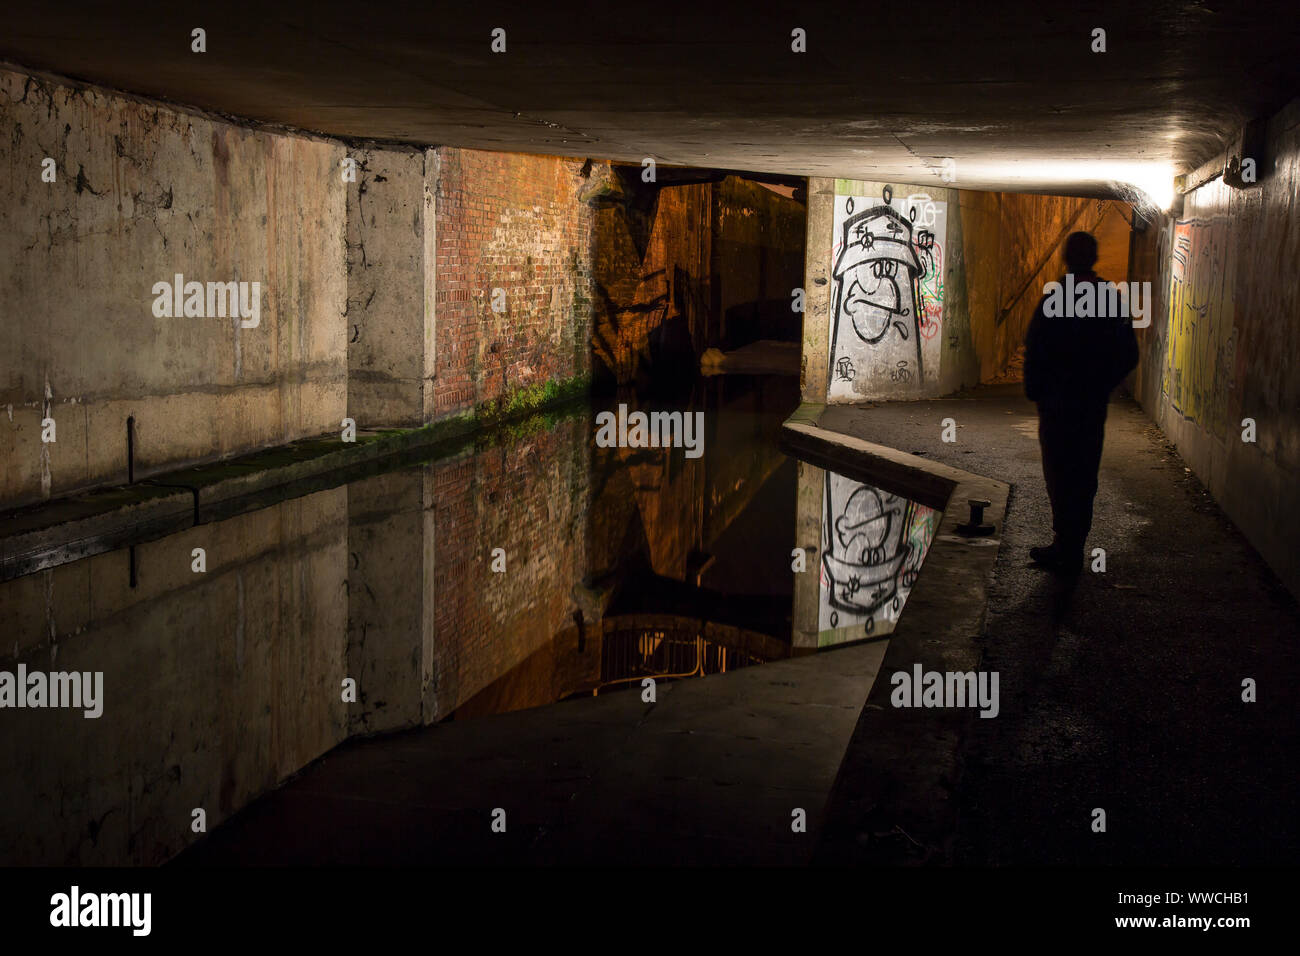 Dark, moody, solitary figure standing by an urban canal in UK pedestrian underpass at night, staring at urban graffiti artwork sprayed on walls Stock Photo